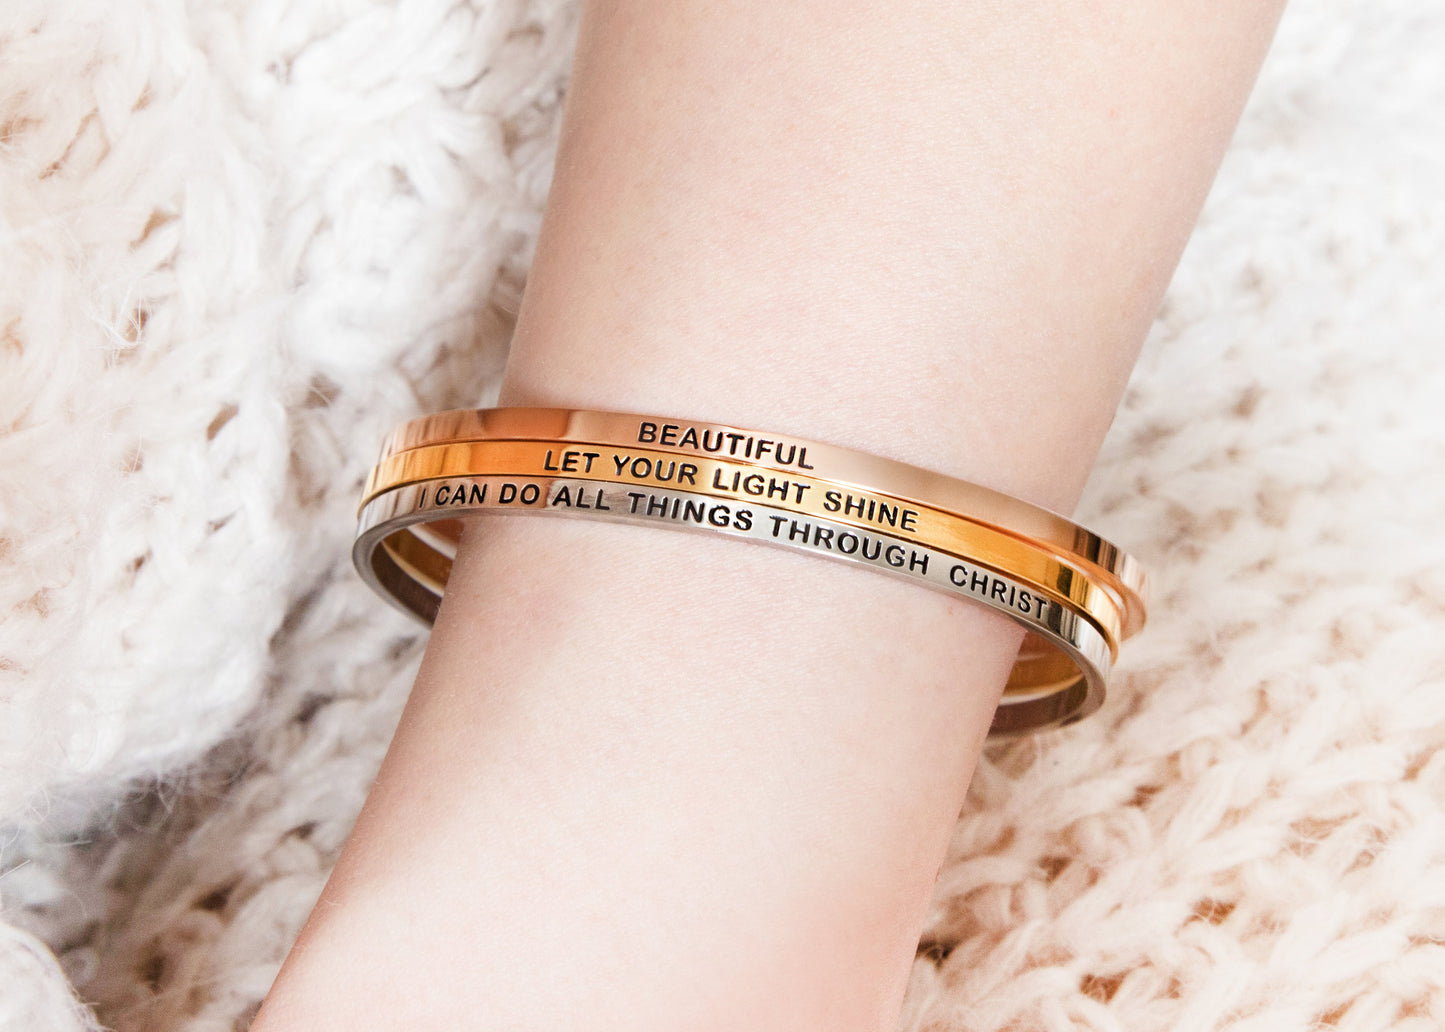 ALL THINGS ARE POSSIBLE - BELIEVE - NCOURAGE Bands and Bracelets